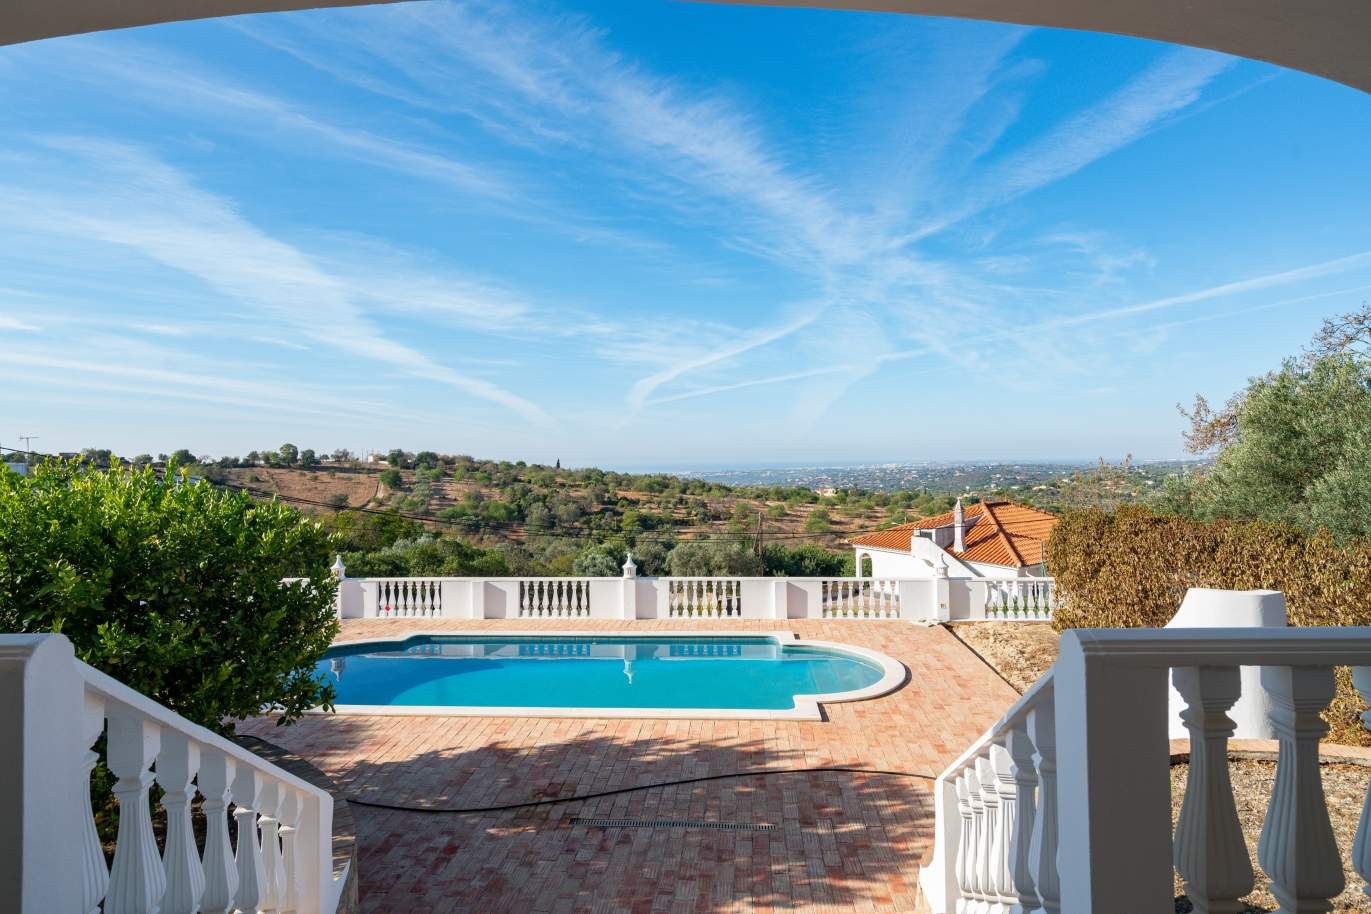 Villa with 4 Bedrooms, swimming pool and sea view, Boliqueime, Algarve_152465